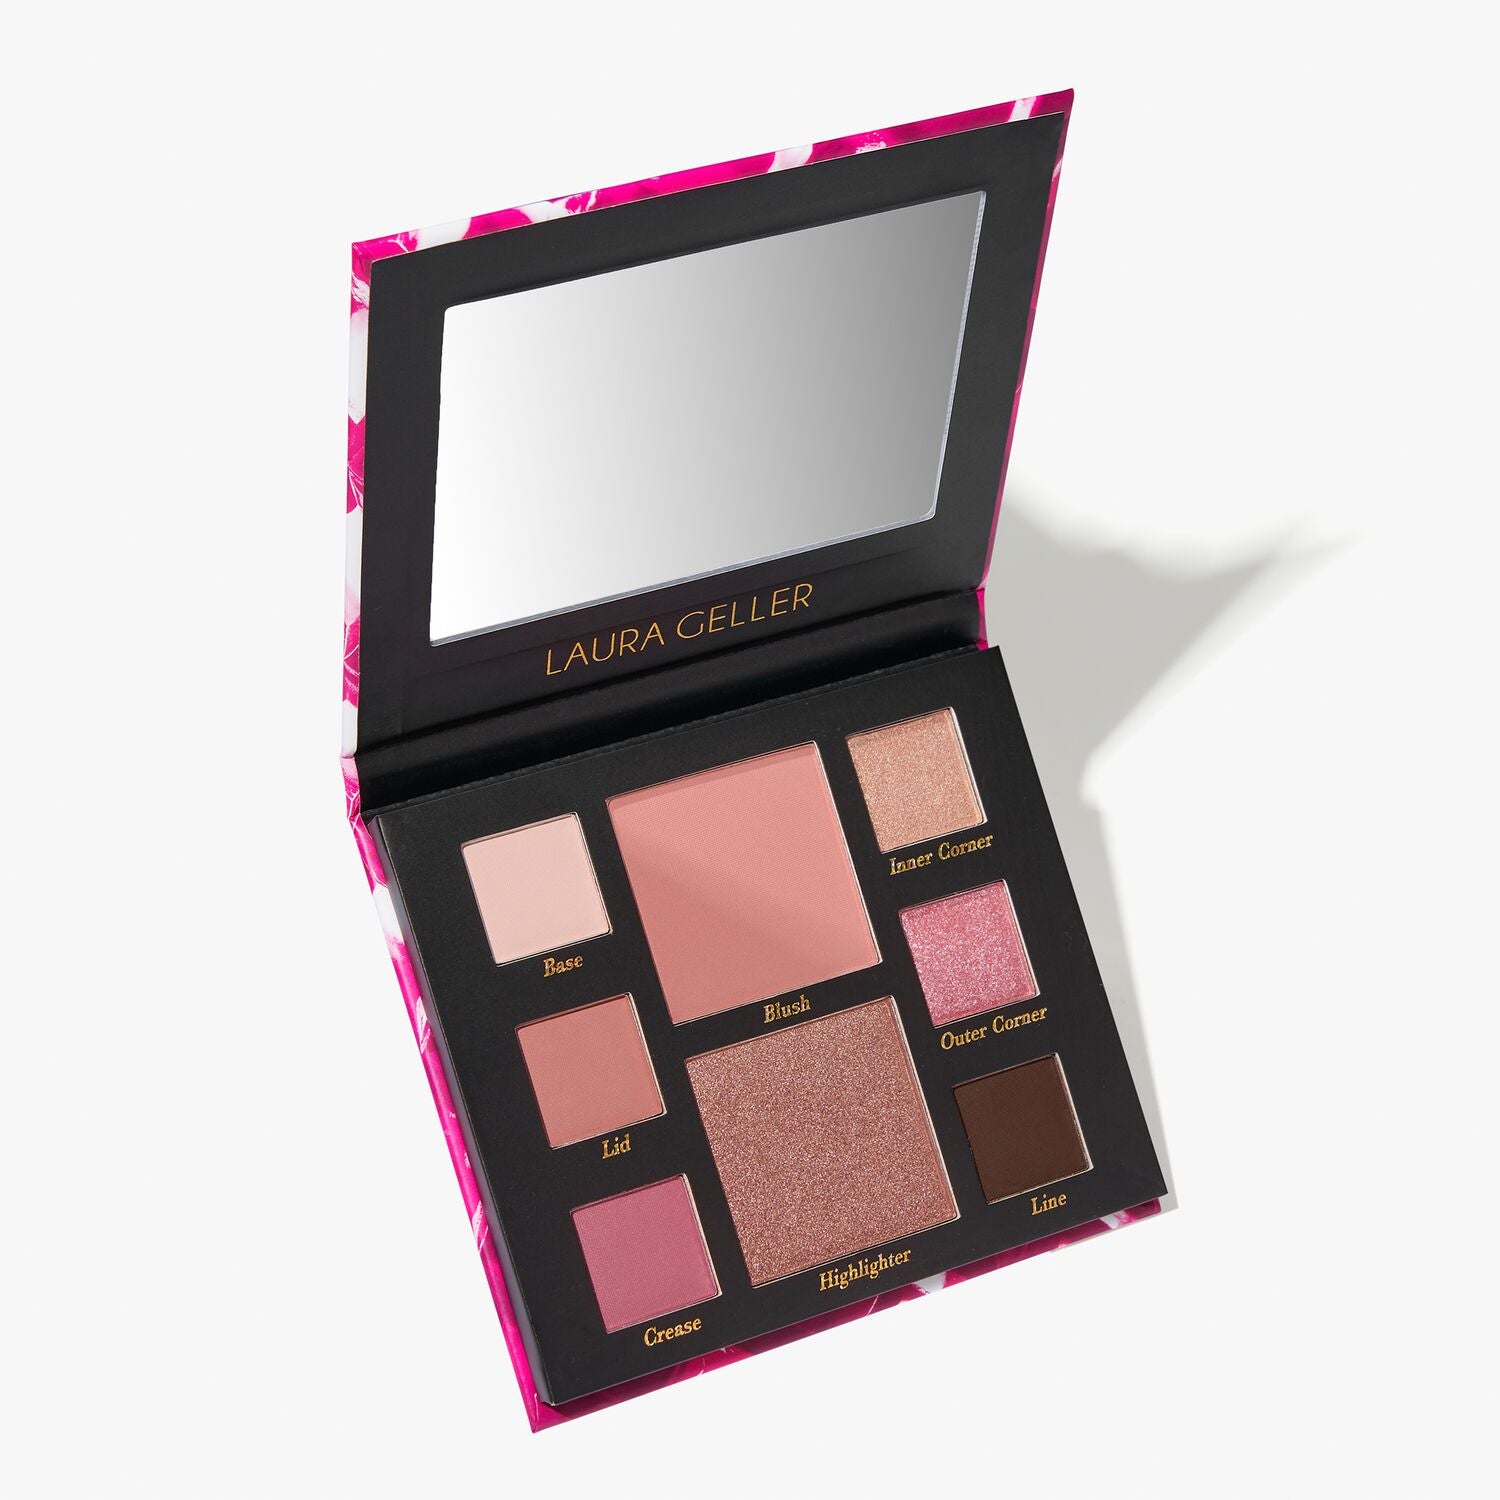 The Social Butterfly Face Palette